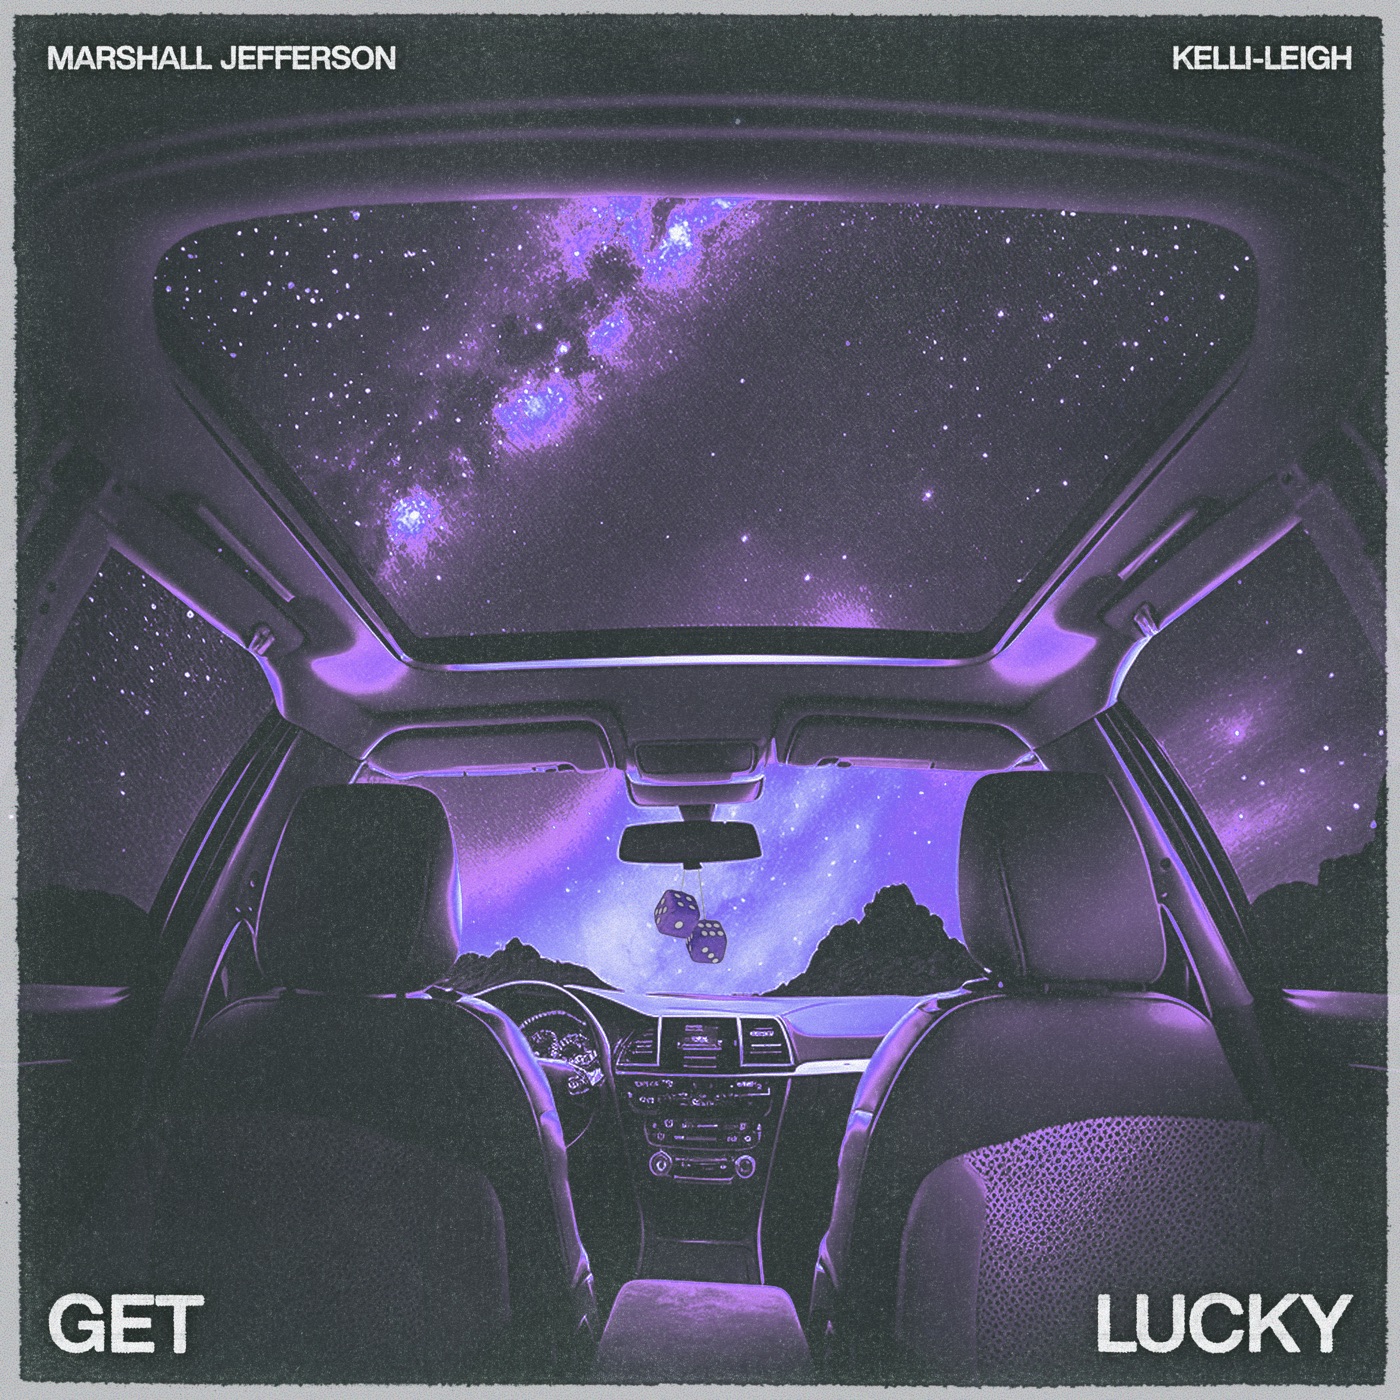 Get Lucky by Marshall Jefferson, Kelli-Leigh